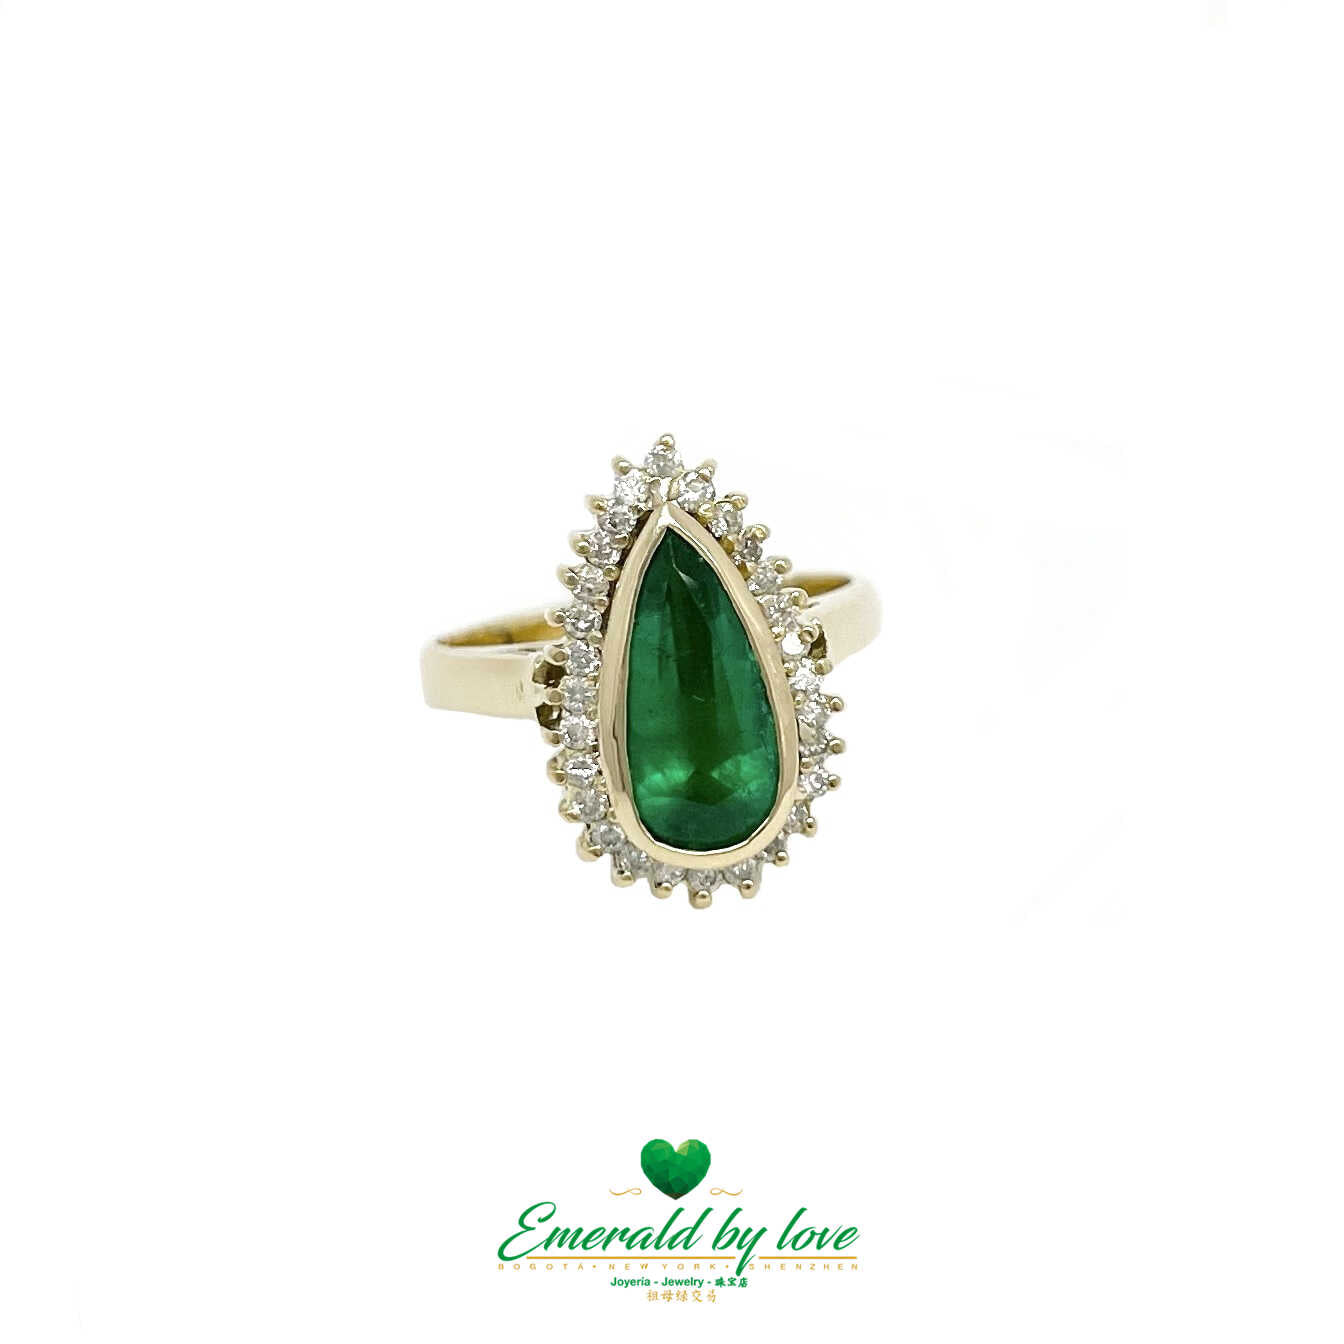 Spectacular Marquise Design: Teardrop Emerald Surrounded by Diamonds in Yellow Gold